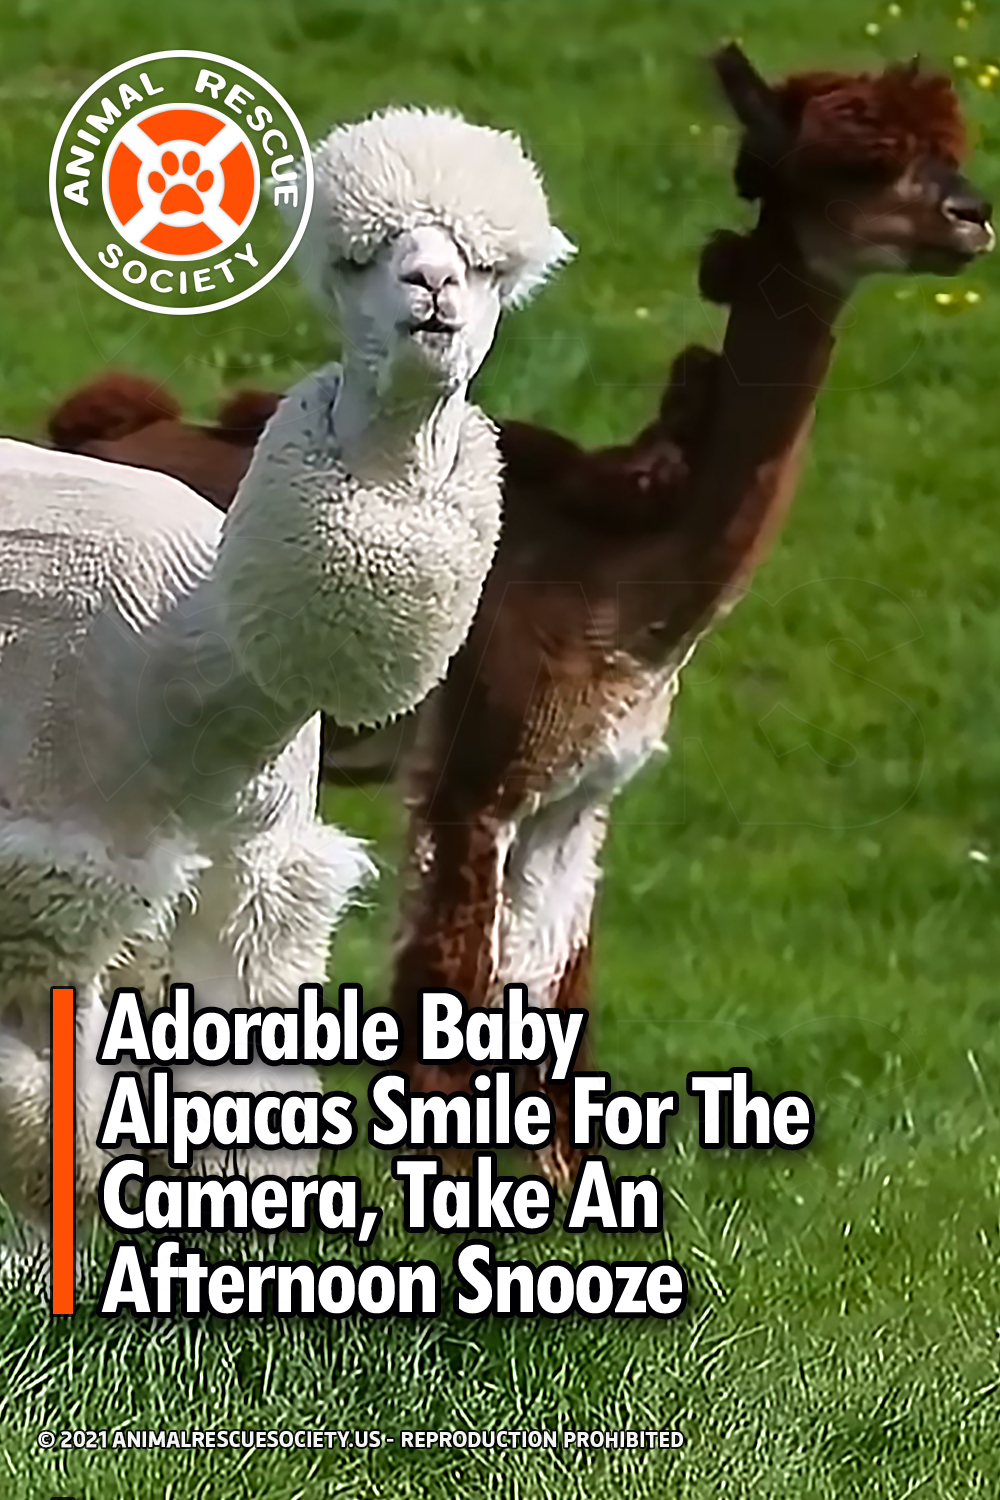 Adorable Baby Alpacas Smile For The Camera, Take An Afternoon Snooze